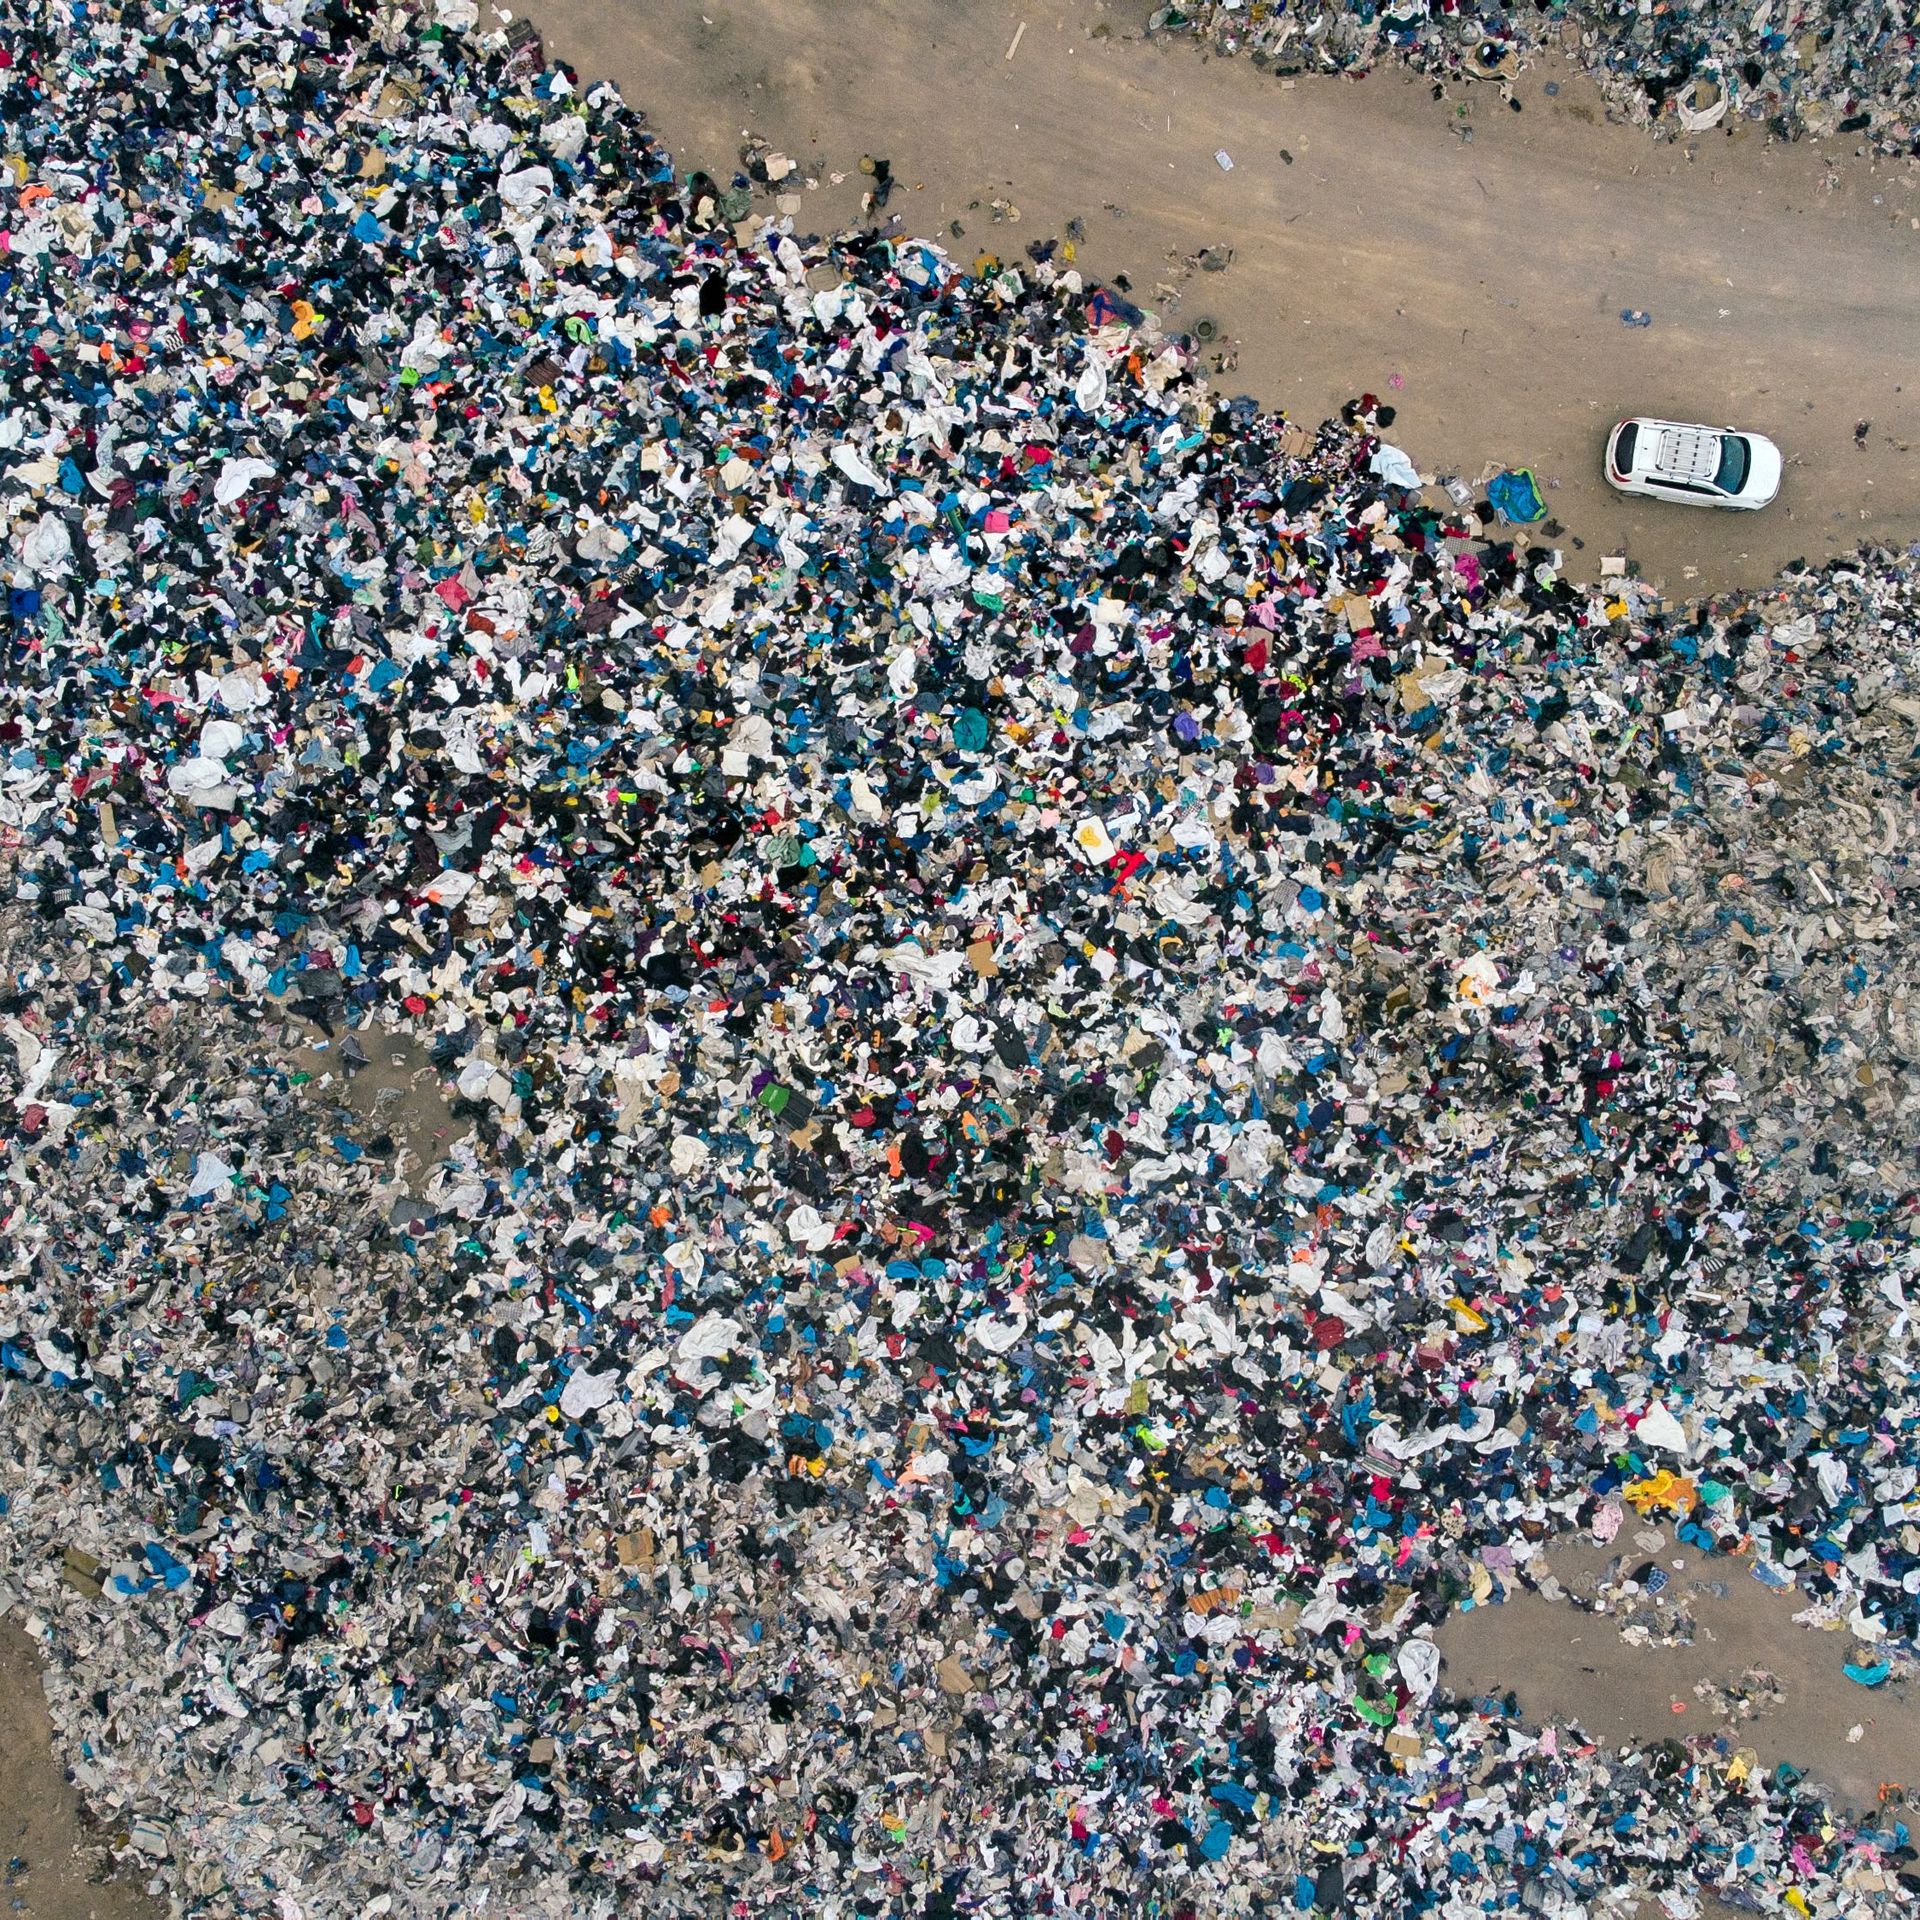 Tons of discarded clothing are piled up on a Chilean desert as a car drives through a dirt road